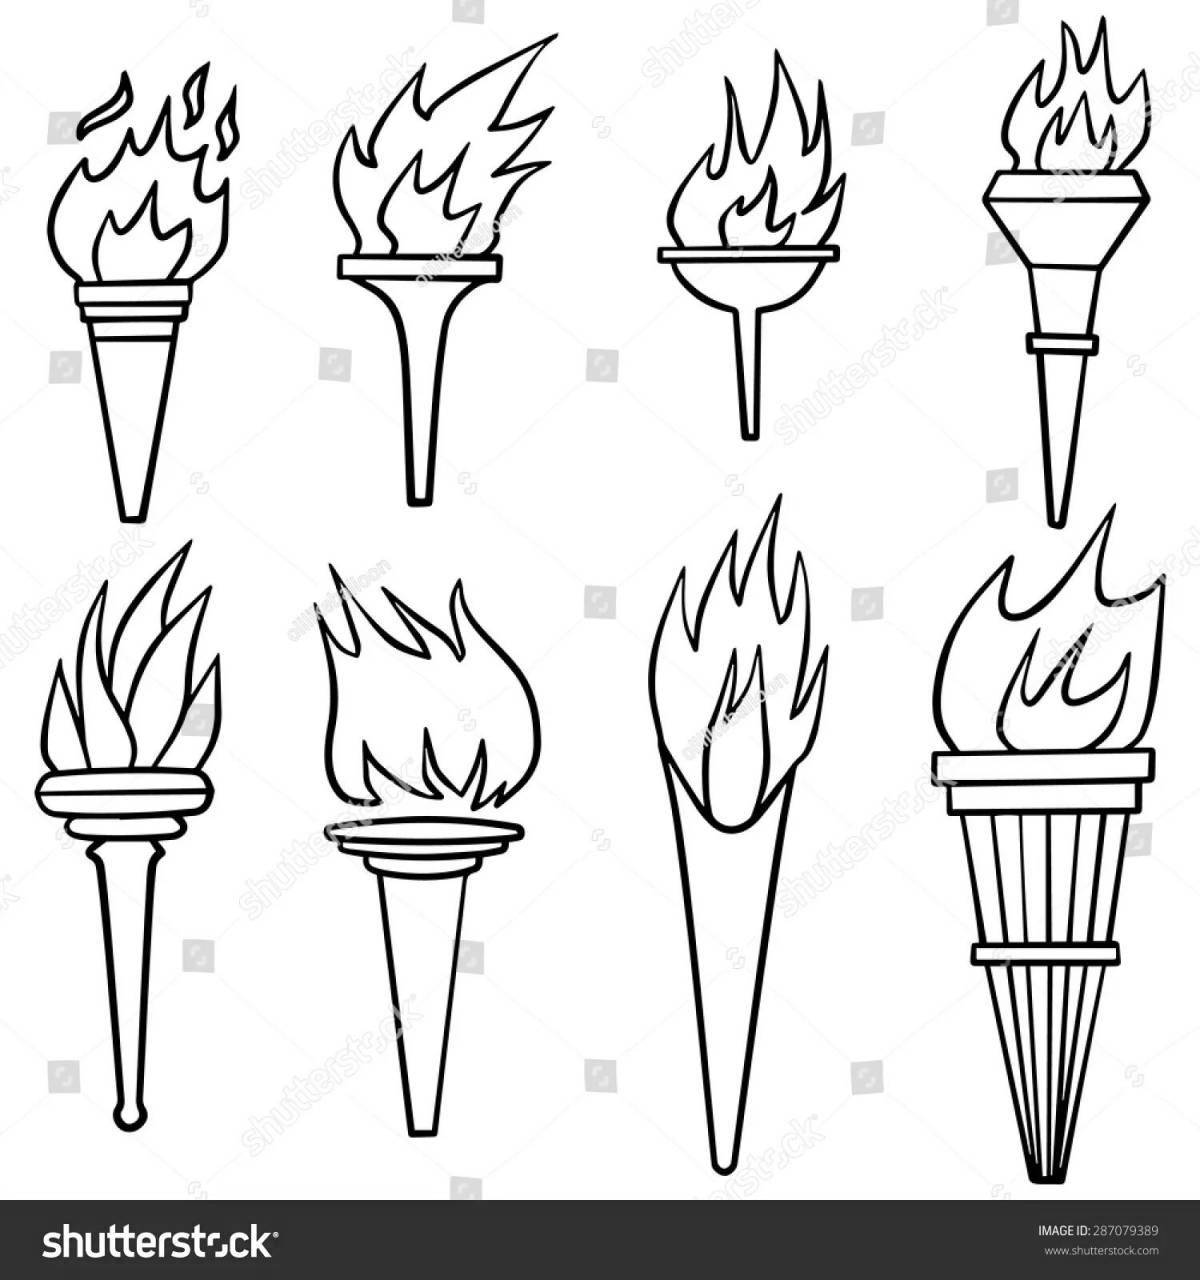 Luxury olympic torch coloring page